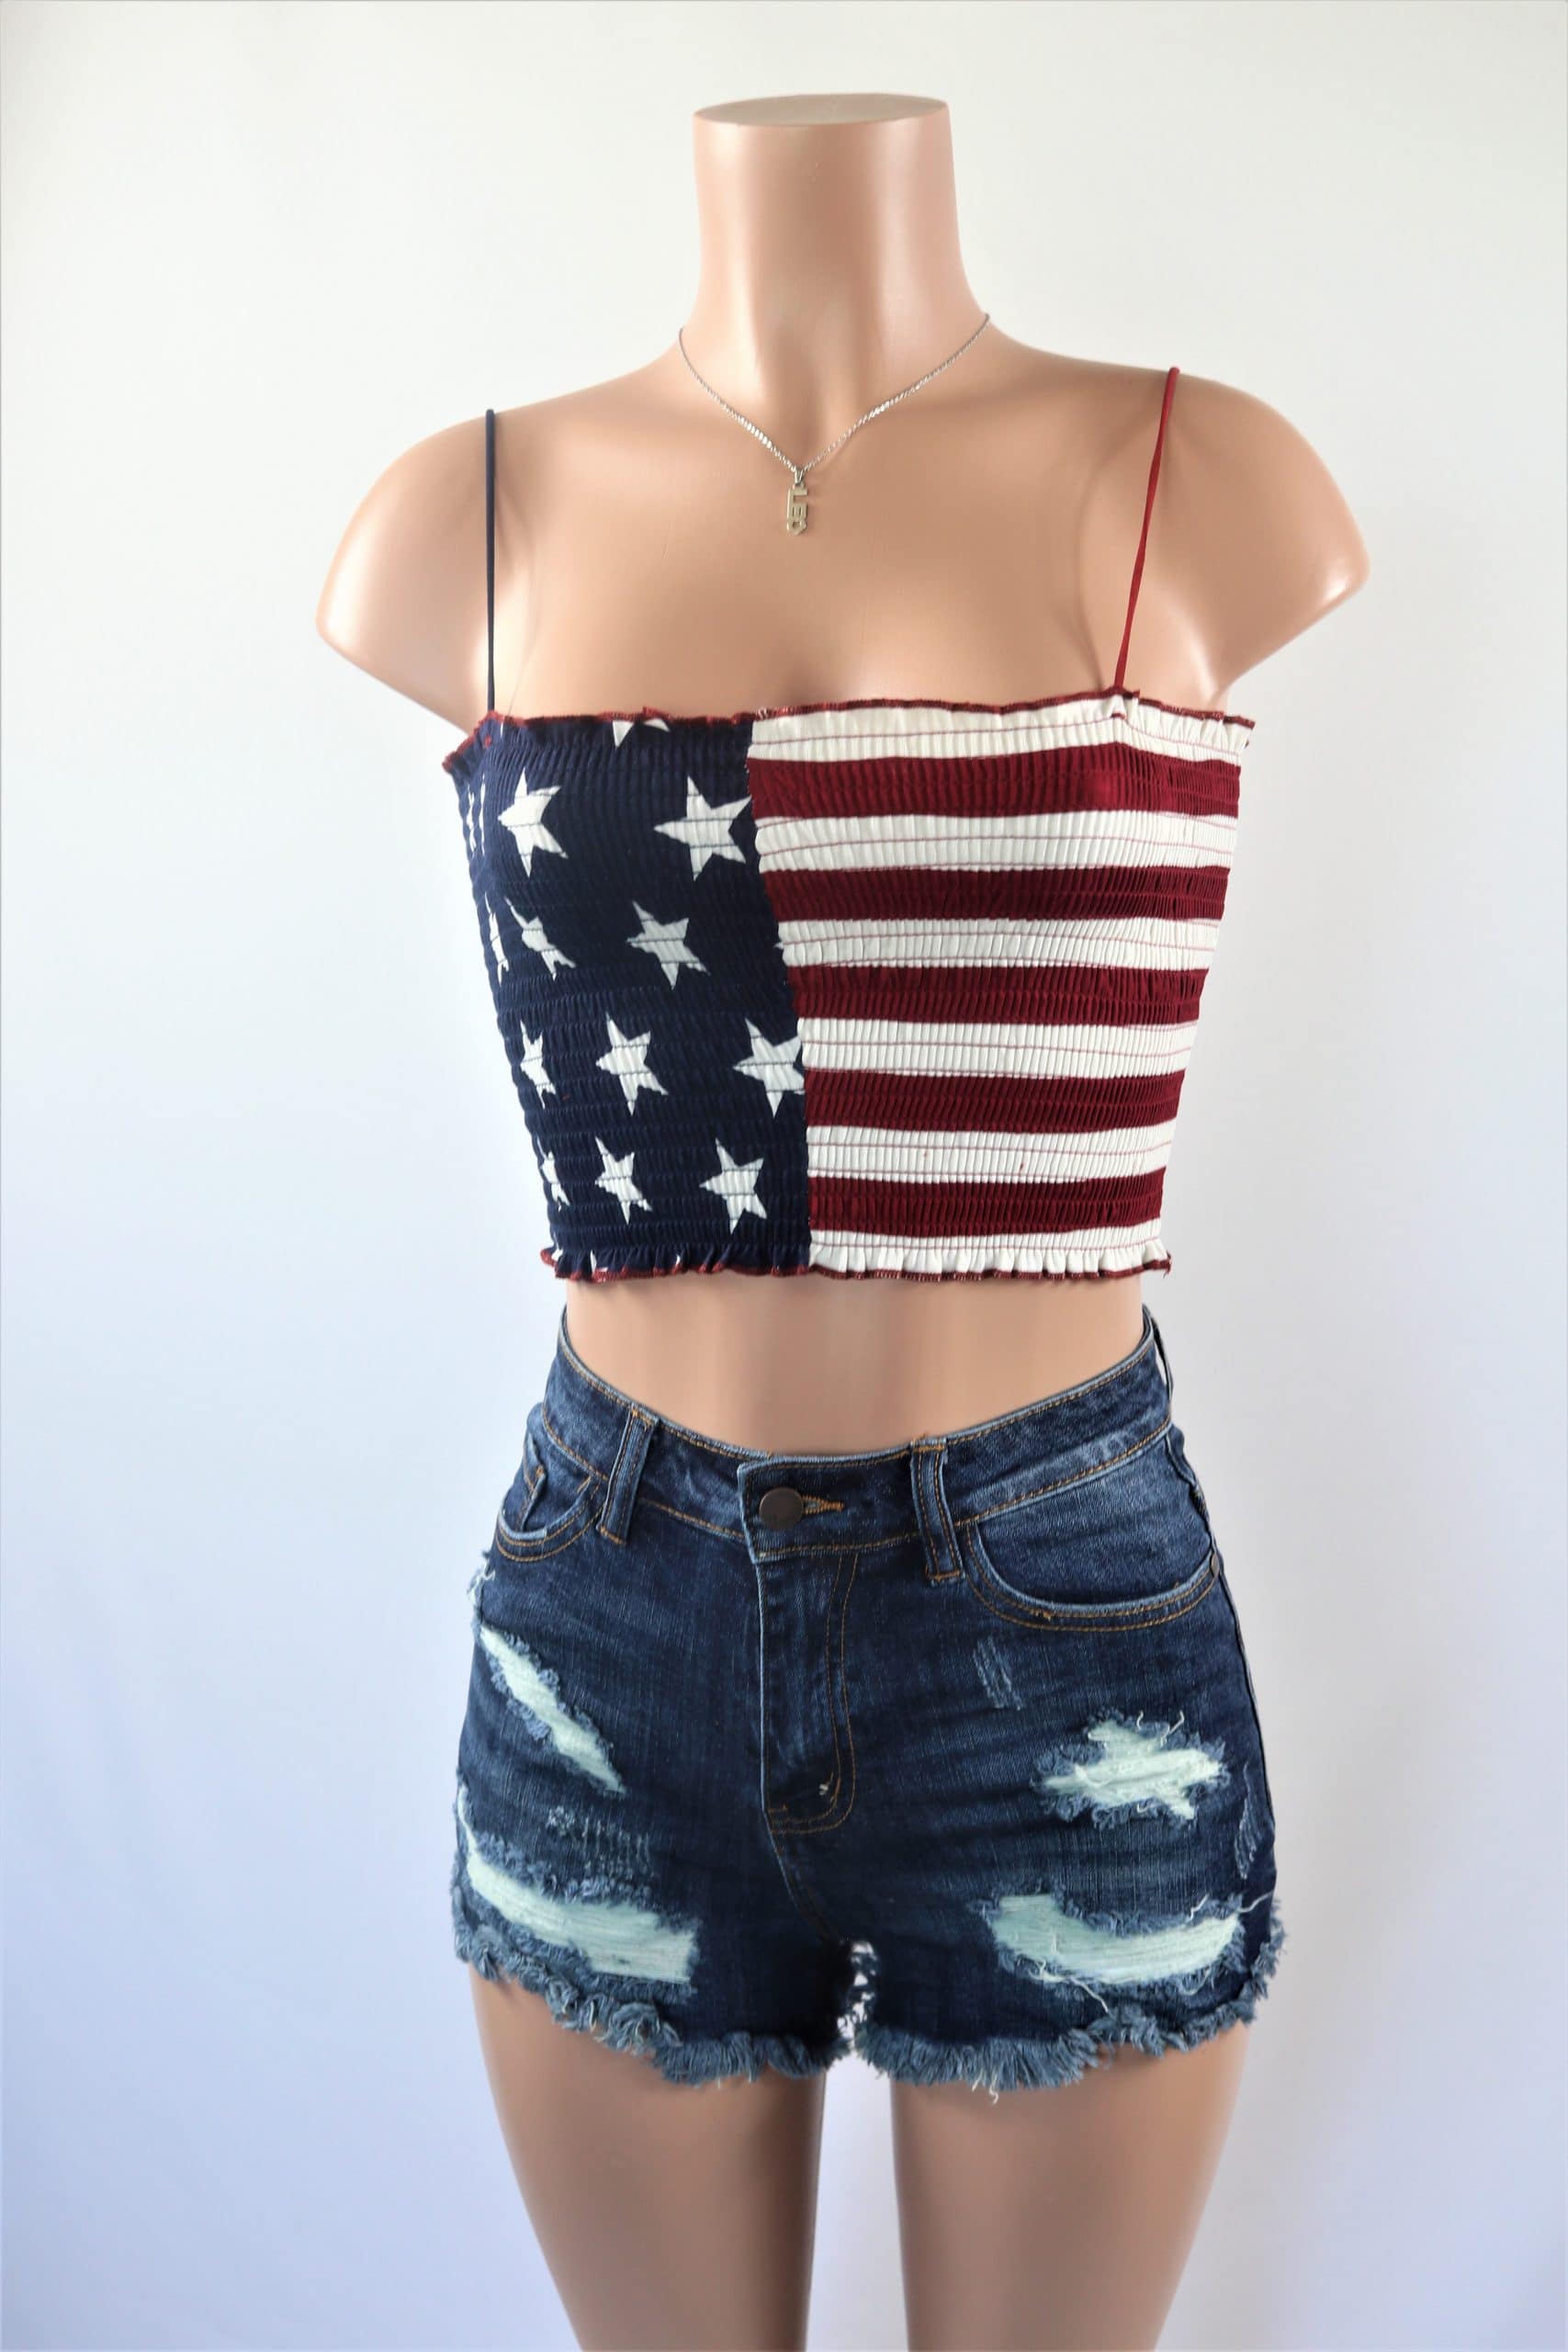 USA Crop Top Red blue white star multi color flag print crop top